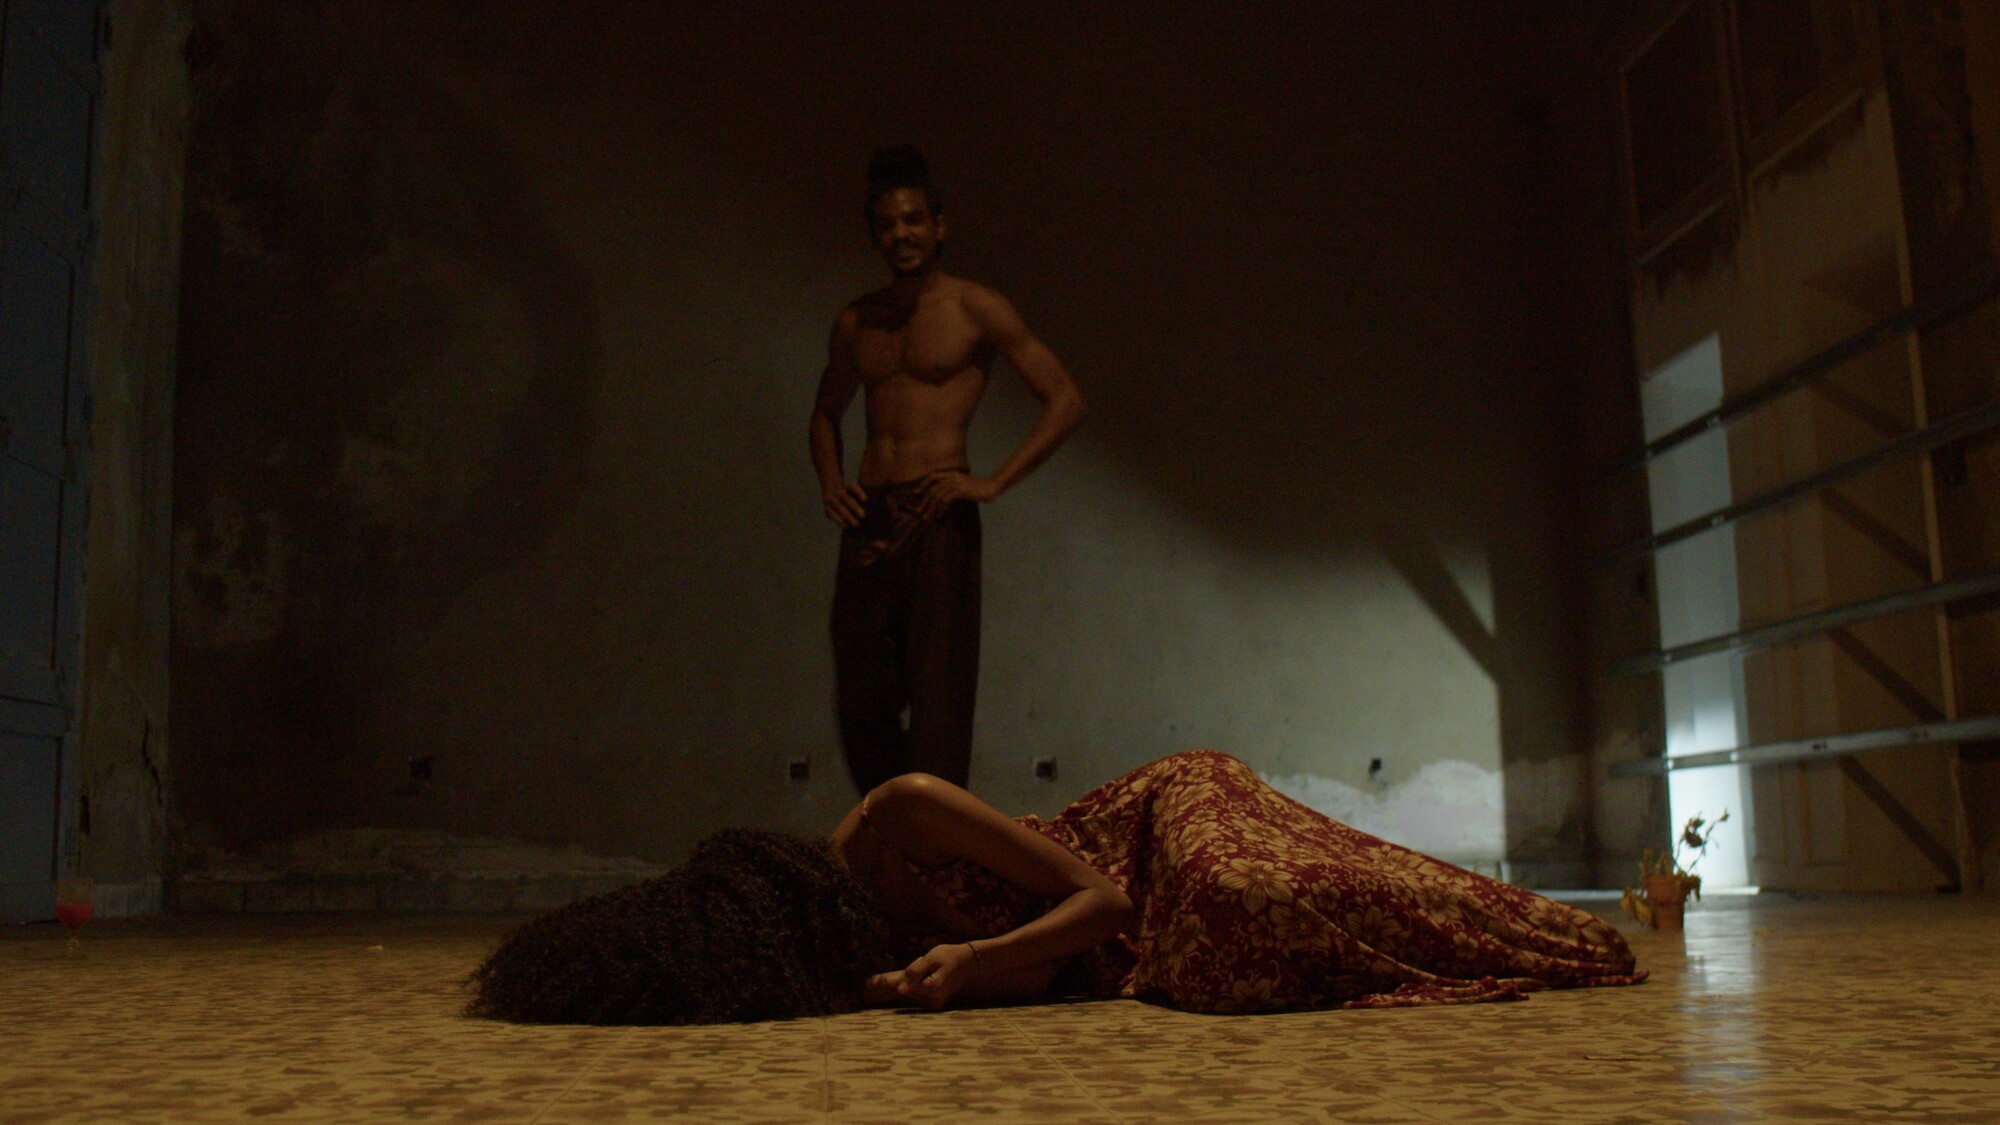 Two actors rehearse in a dimly lit space, with one standing and one laying on the ground.